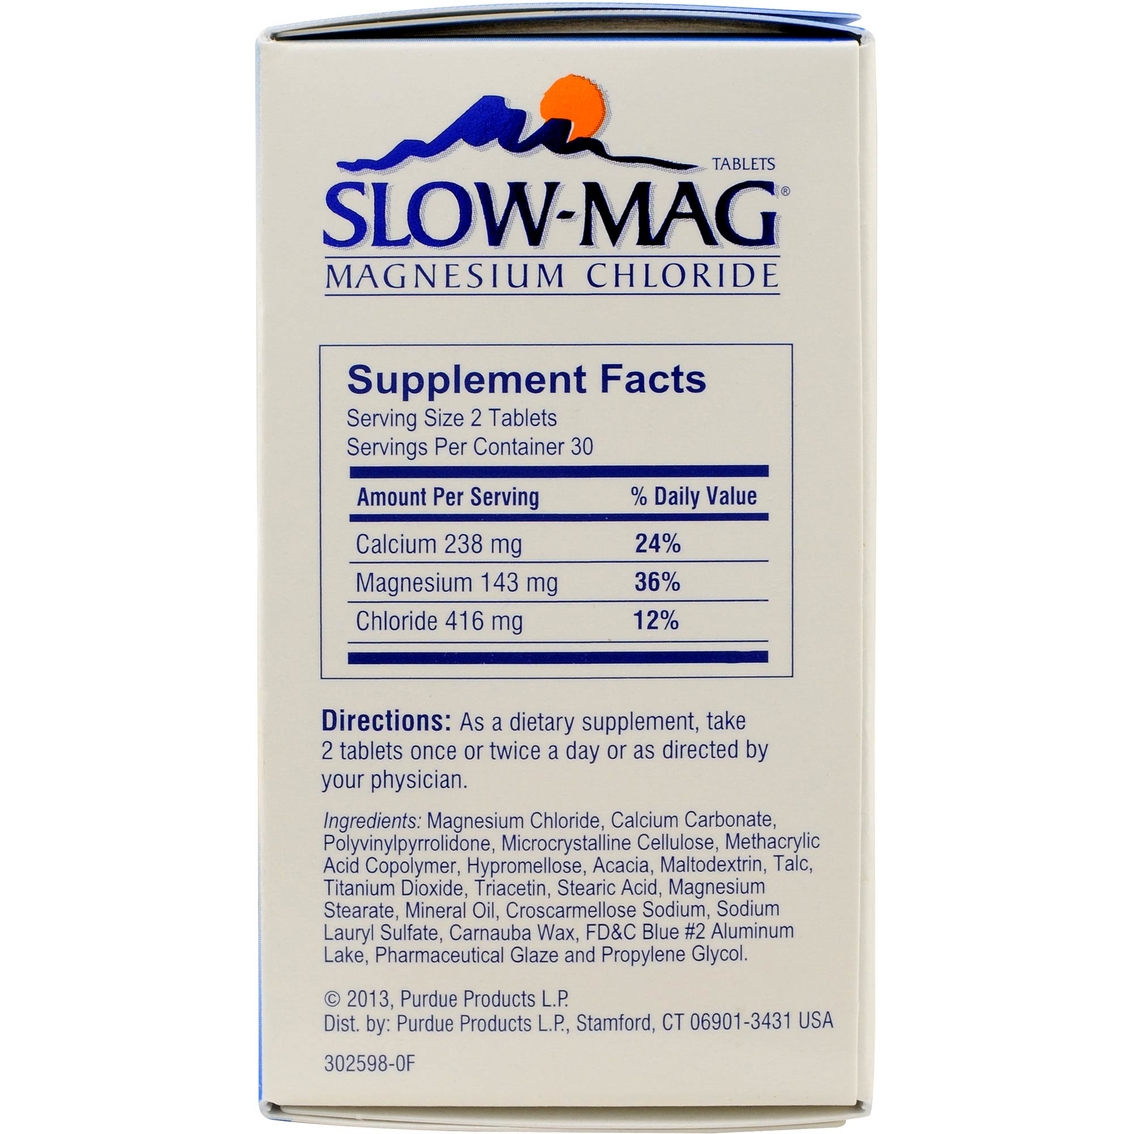 Slow-Mag Magnesium Chloride with Calcium Tablets, 60 pk. - Image 2 of 2